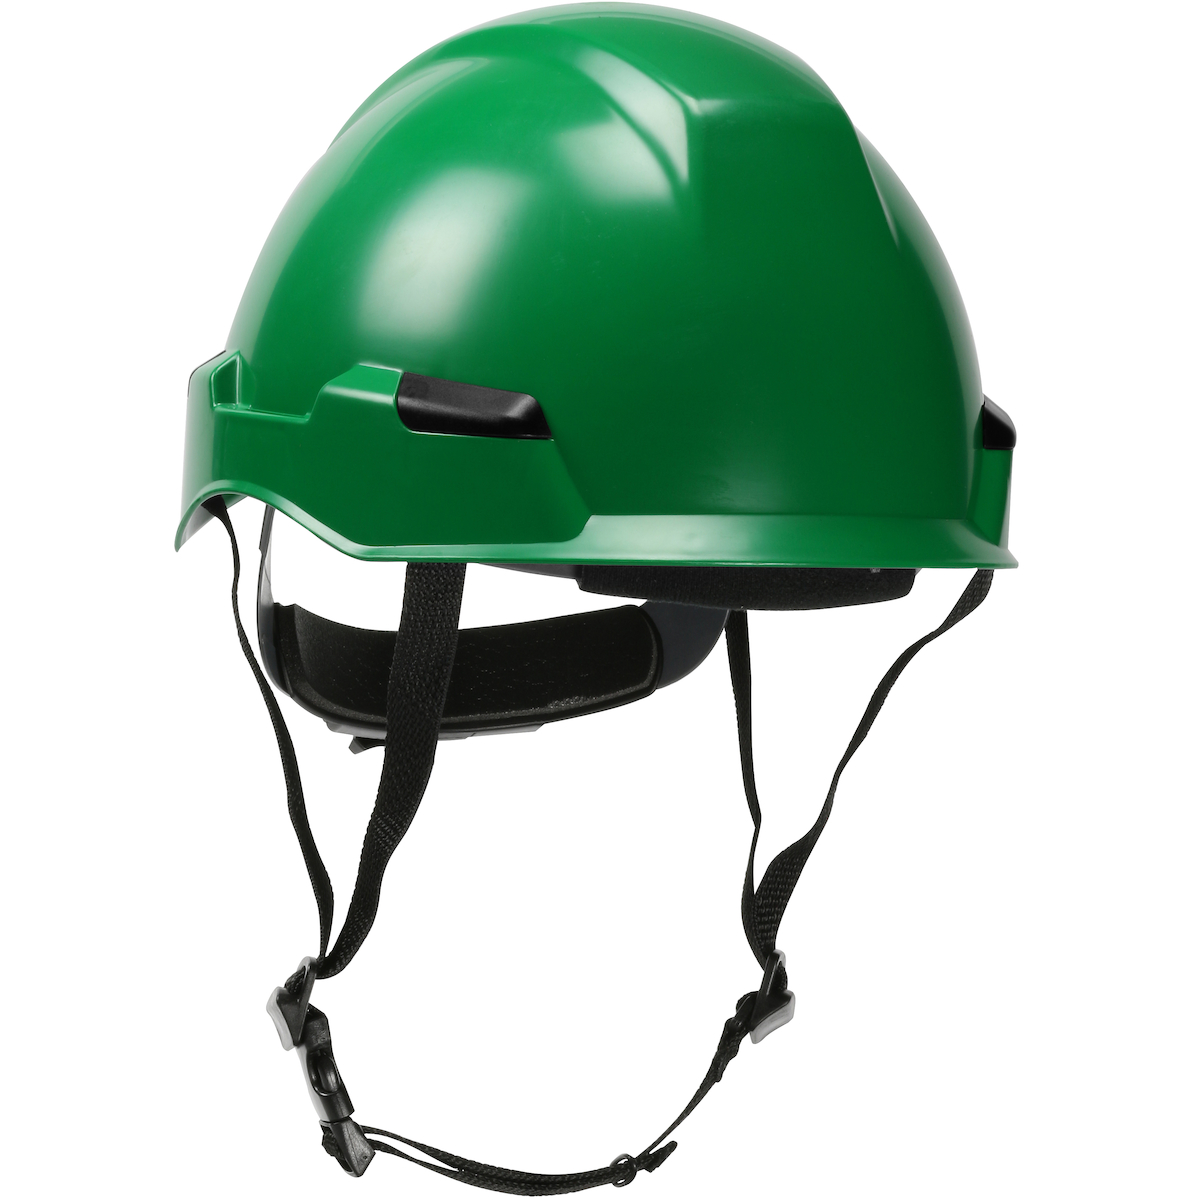 280-HP142R PIP® Dynamic Rocky™ Industrial Climbing Helmet with Polycarbonate / ABS Shell, Hi-Density Foam Impact Liner, Nylon Suspension, Wheel Ratchet Adjustment and 4-Point Chin Strap- Green